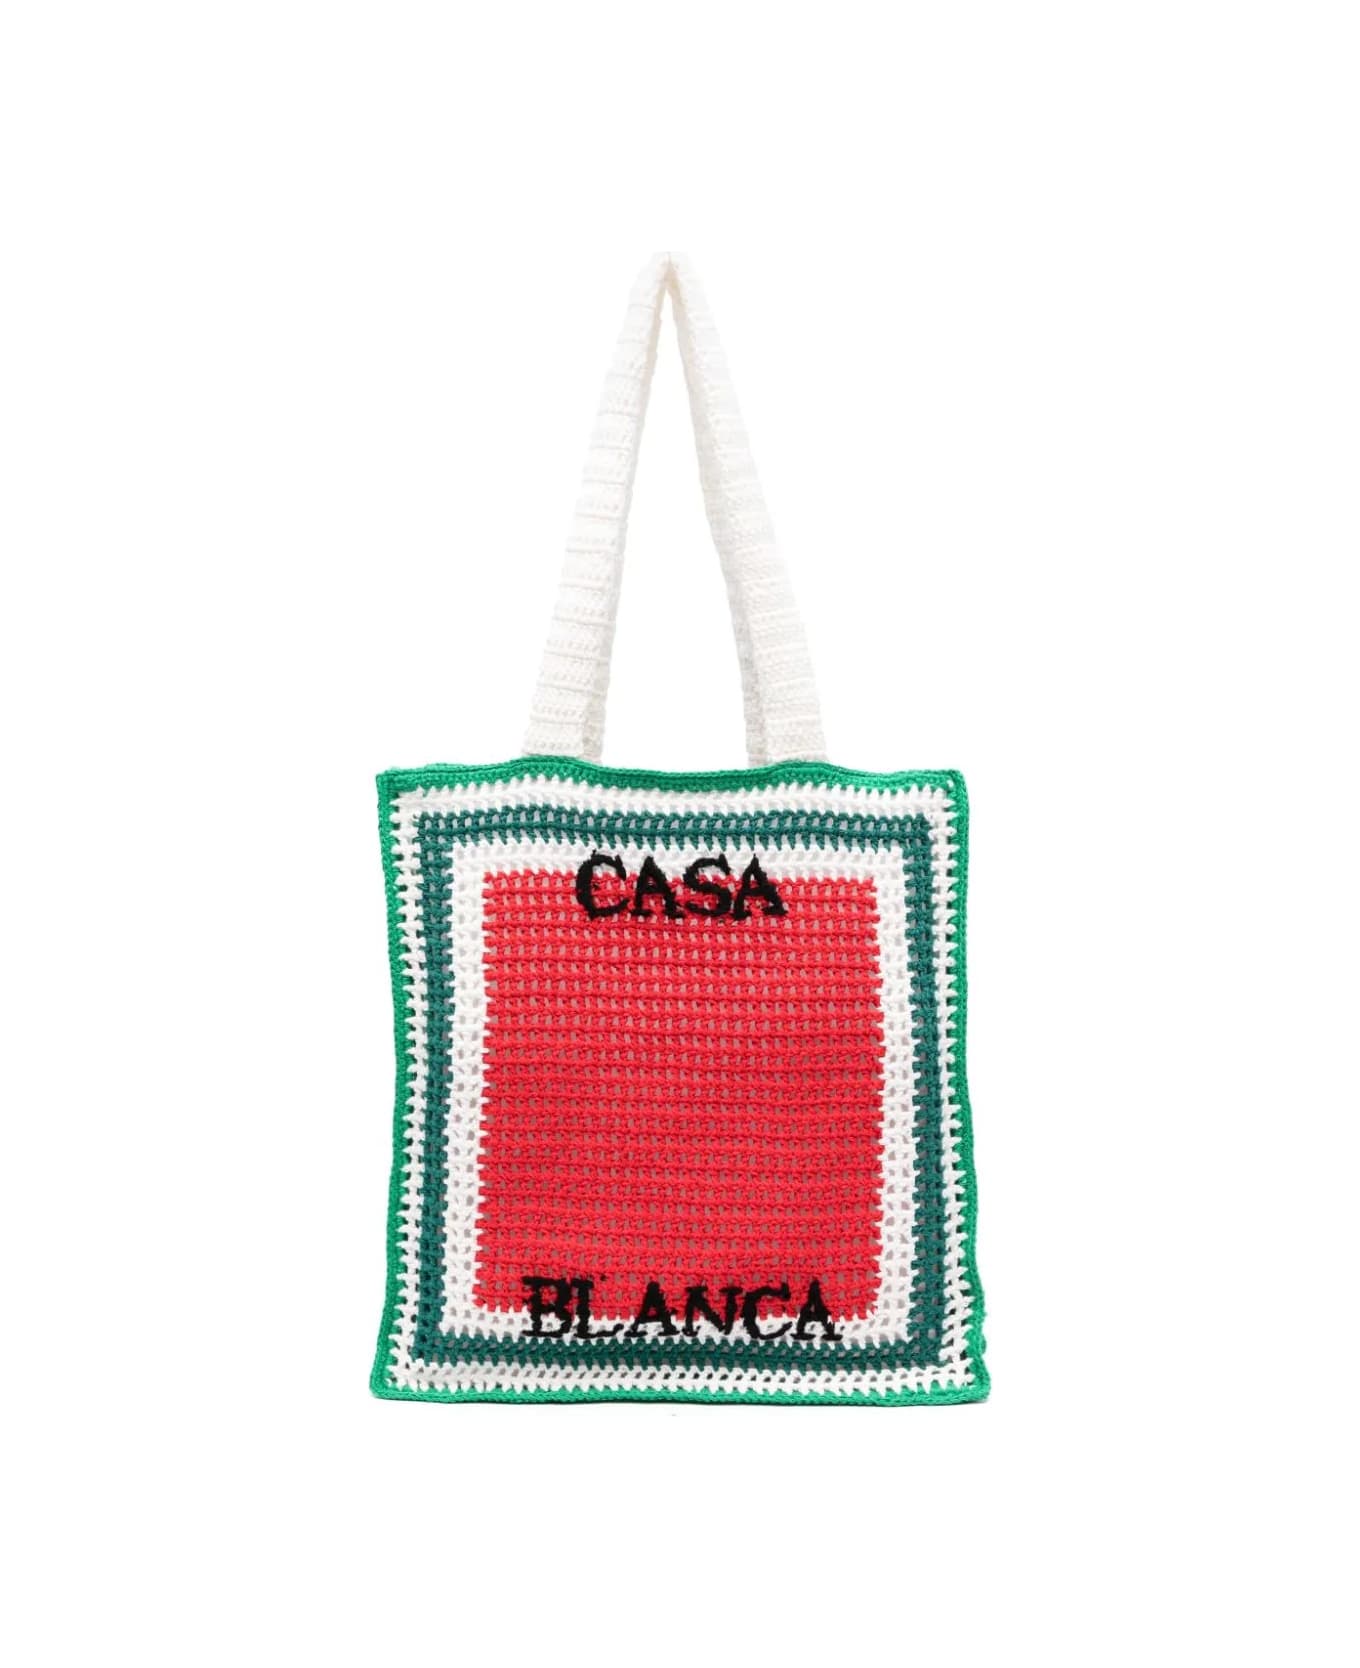 Casablanca Crocheted Atlantis Tote Bag In Green, Red And White - Red トートバッグ